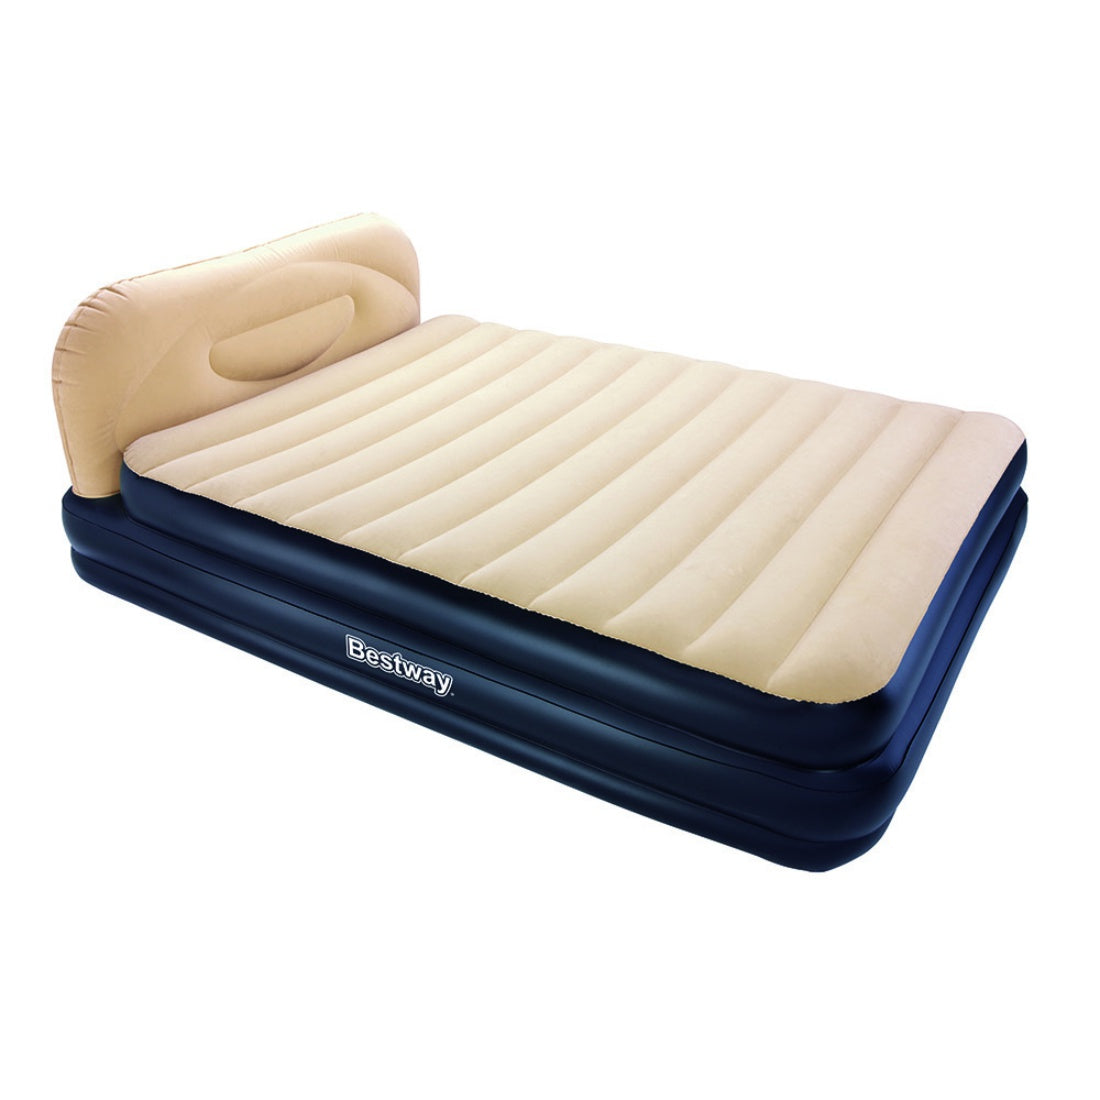 NEW Bestway Soft Back Elevated Queen Air Bed Inflatable Mattress Electric Pump